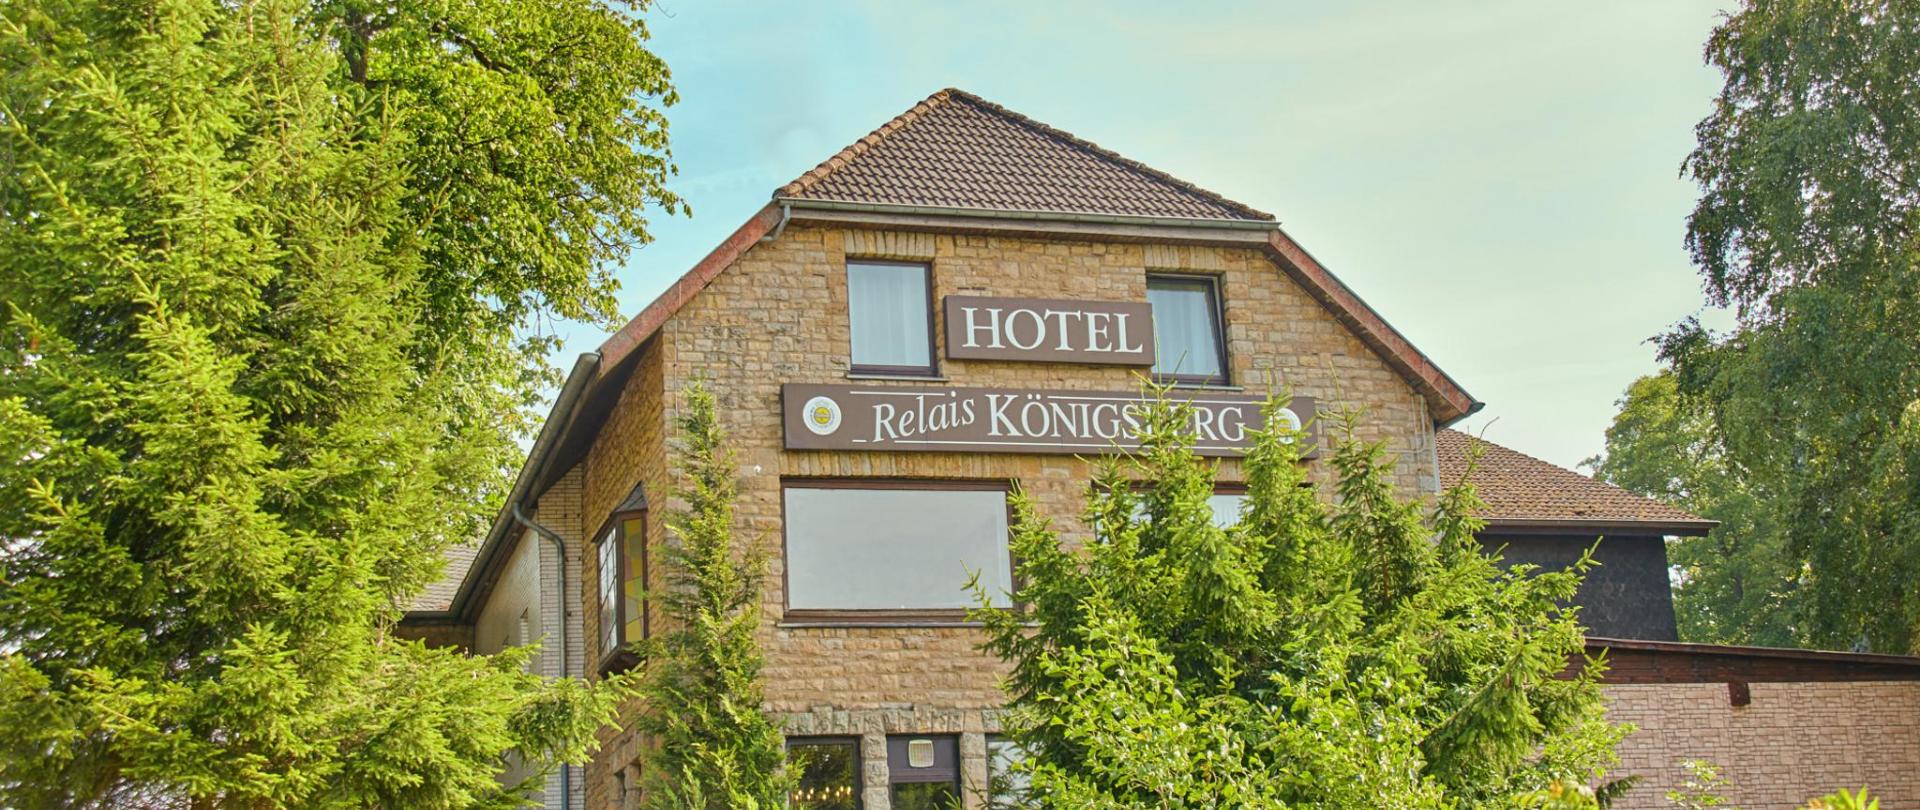 Welcome to the Hotel Relais Königsberg